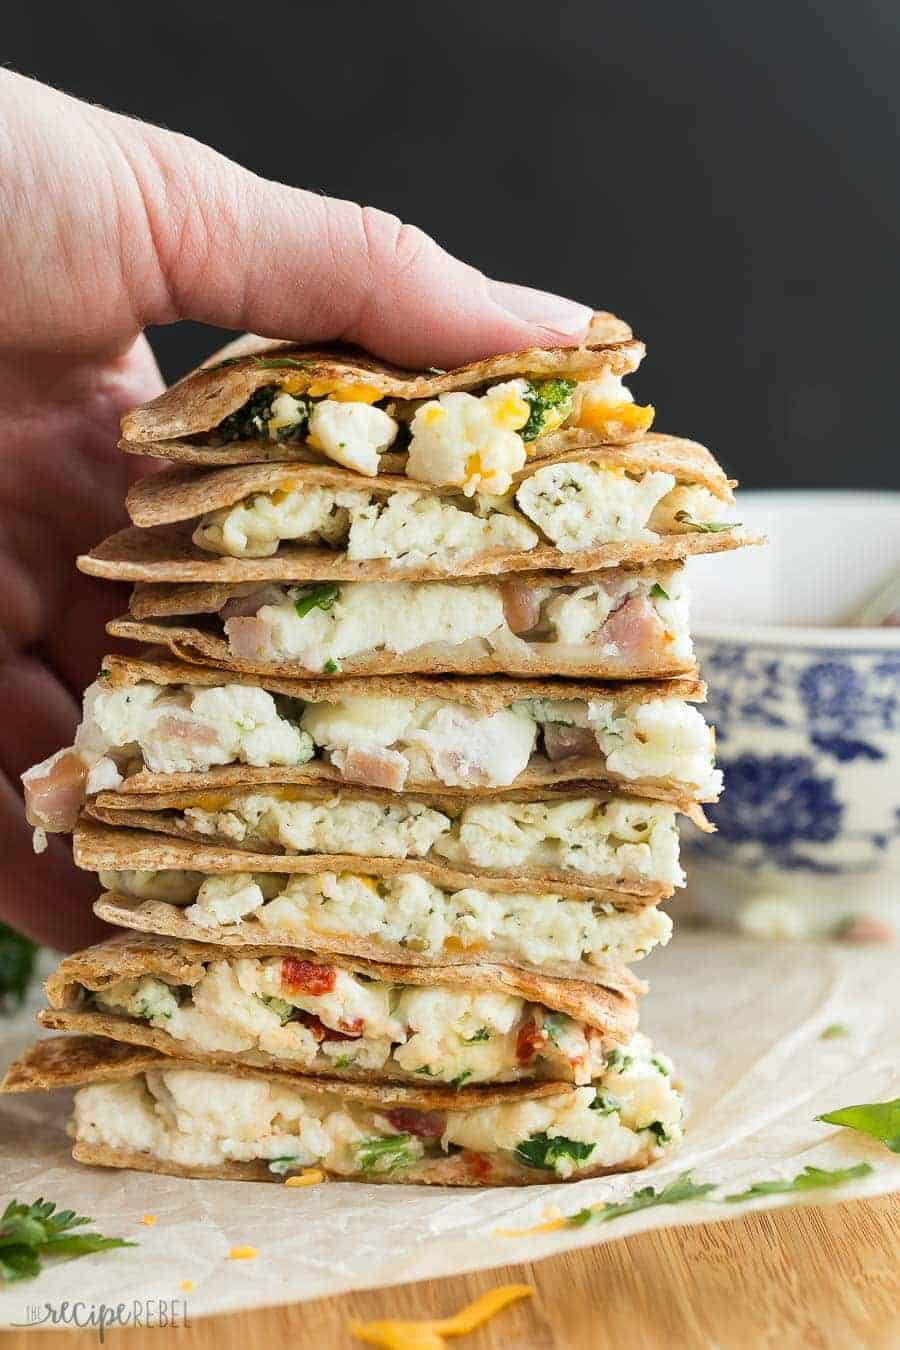 These Make Ahead Breakfast Quesadillas are the perfect healthy breakfast, lunch or dinner! They're easy to make for your week's meal prep, freezer friendly and totally customizable. A step by step recipe video shows you 4 different ways to make them: Broccoli Cheddar; Three Cheese Pesto; Roasted Red Pepper, Spinach and Parmesan; and Denver. | meal prep | make ahead breakfast | freezer breakfast quesadillas | freezer meal | #mealprep #makeahead #breakfast #freezermeal